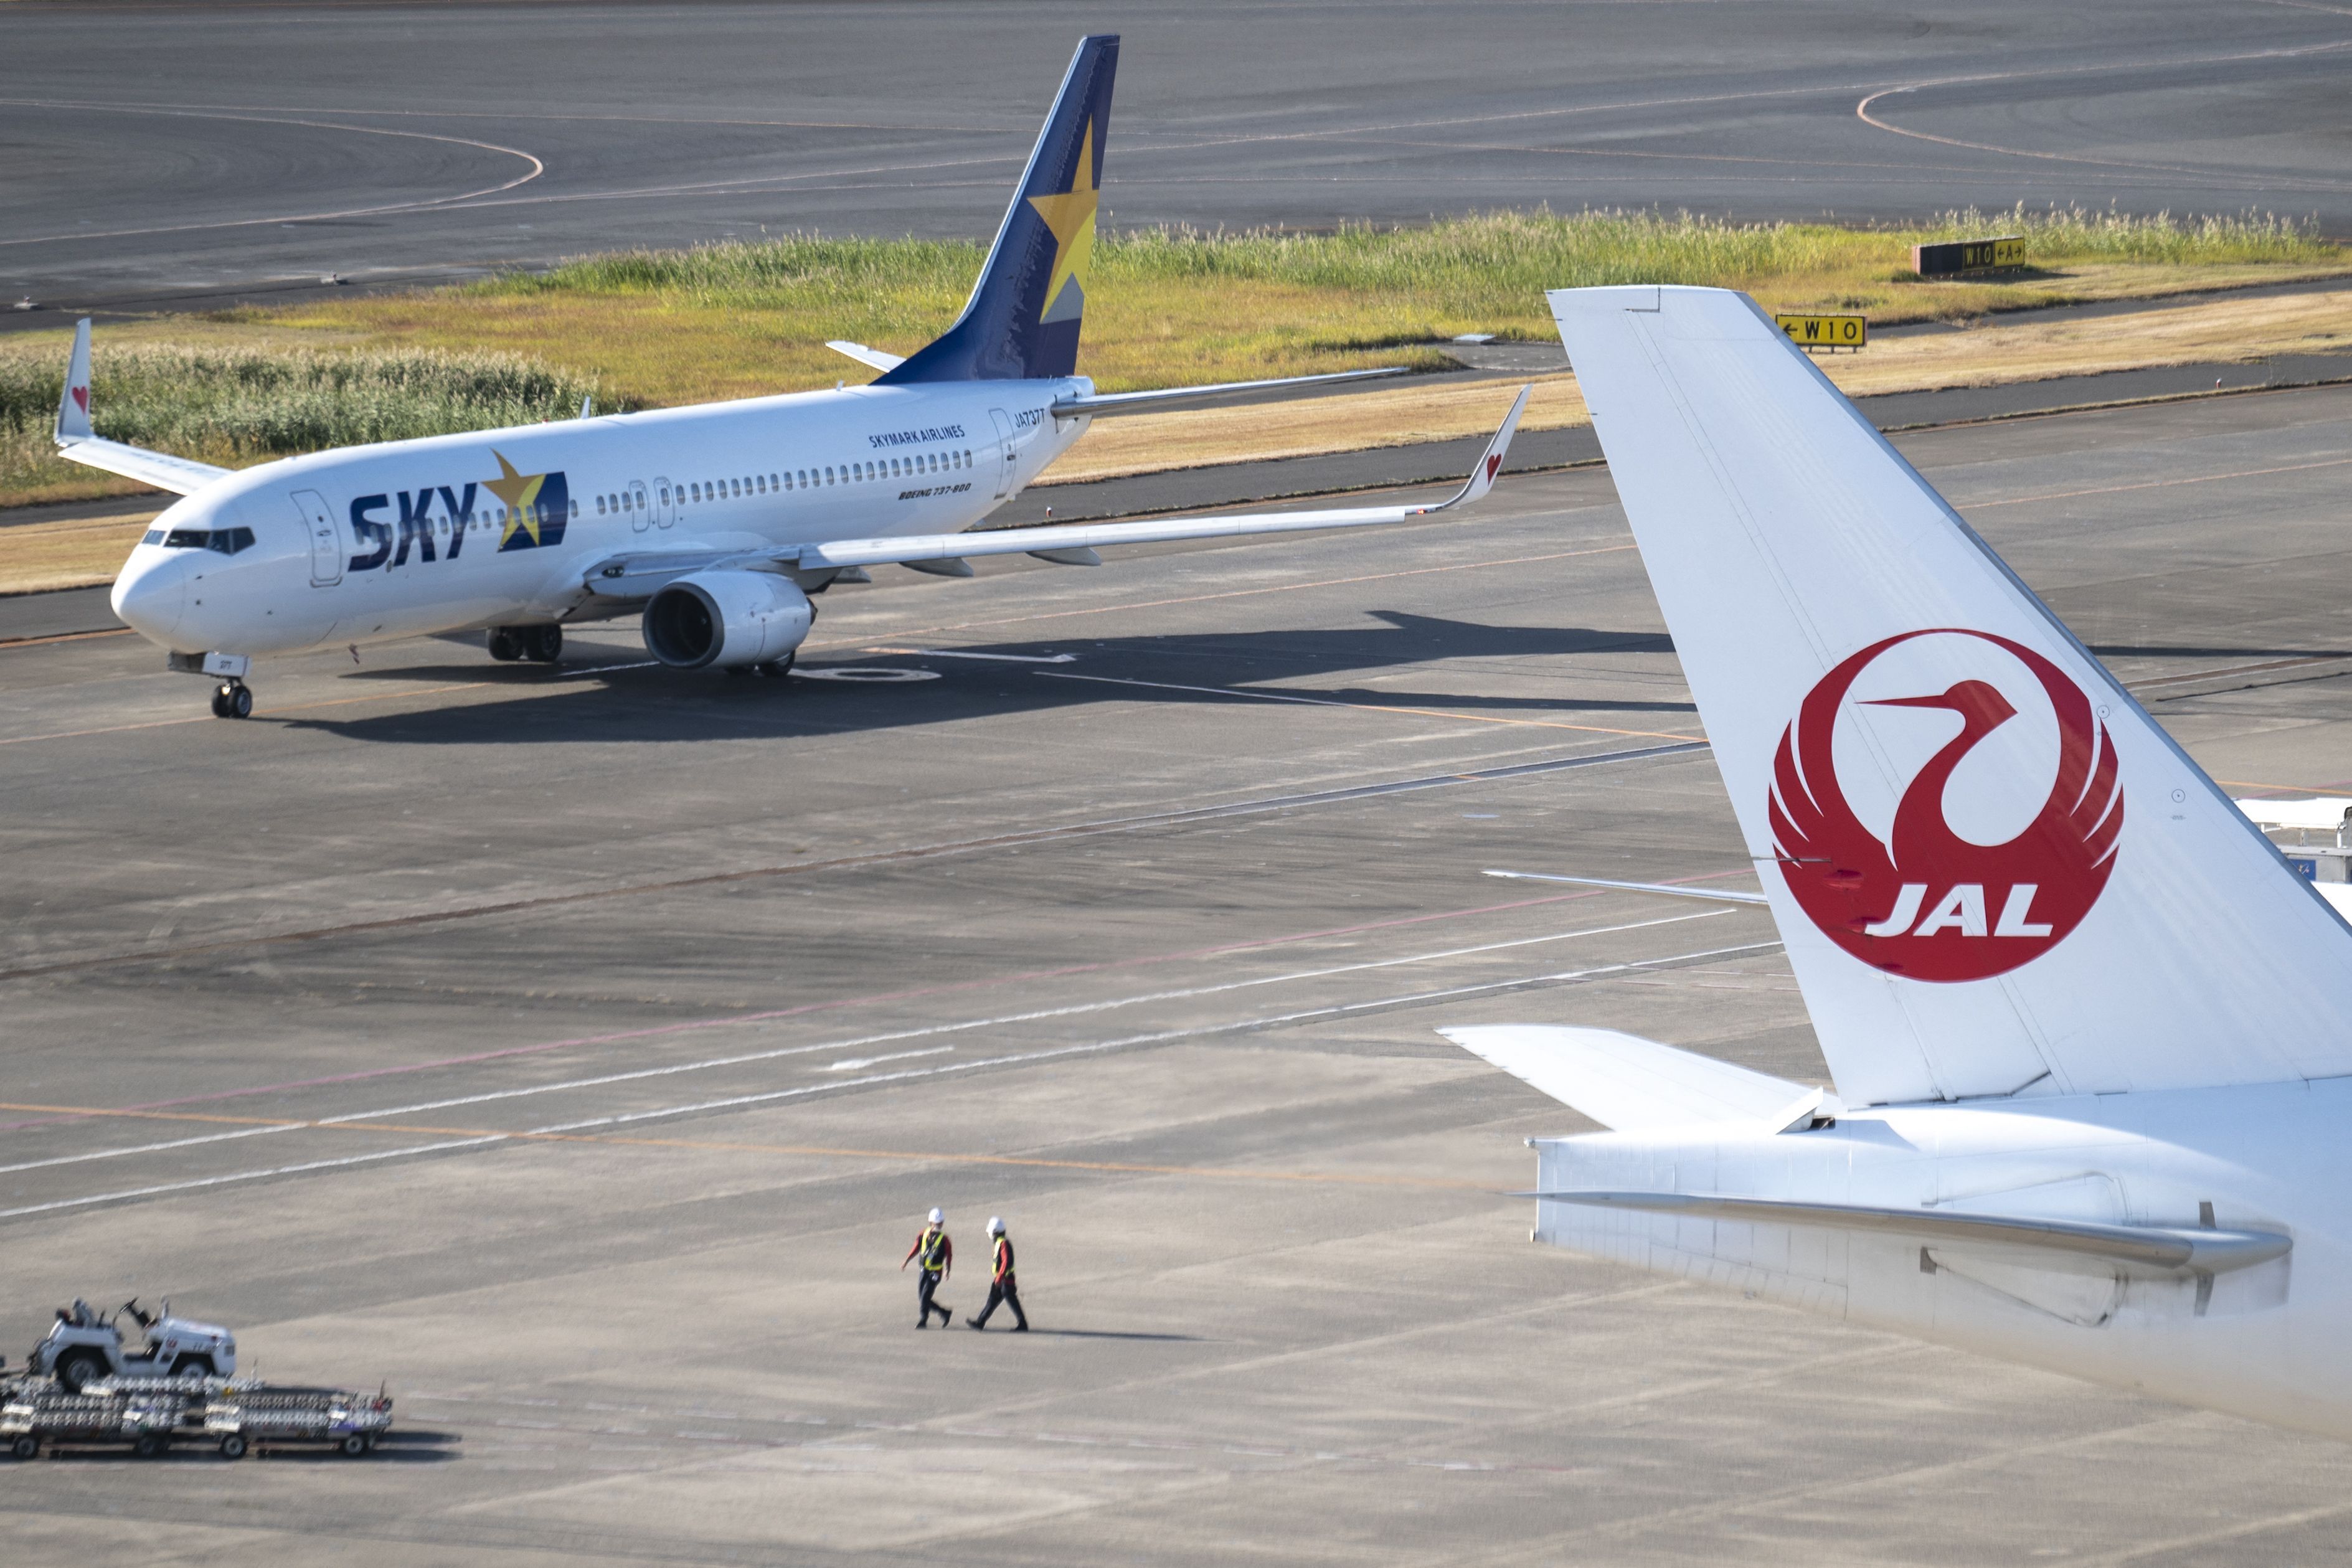 A Skymark Airlines Boeing 737-800 is seen past the tail section of a Japan Airlines (JAL) aircraft at Haneda airport in Tokyo